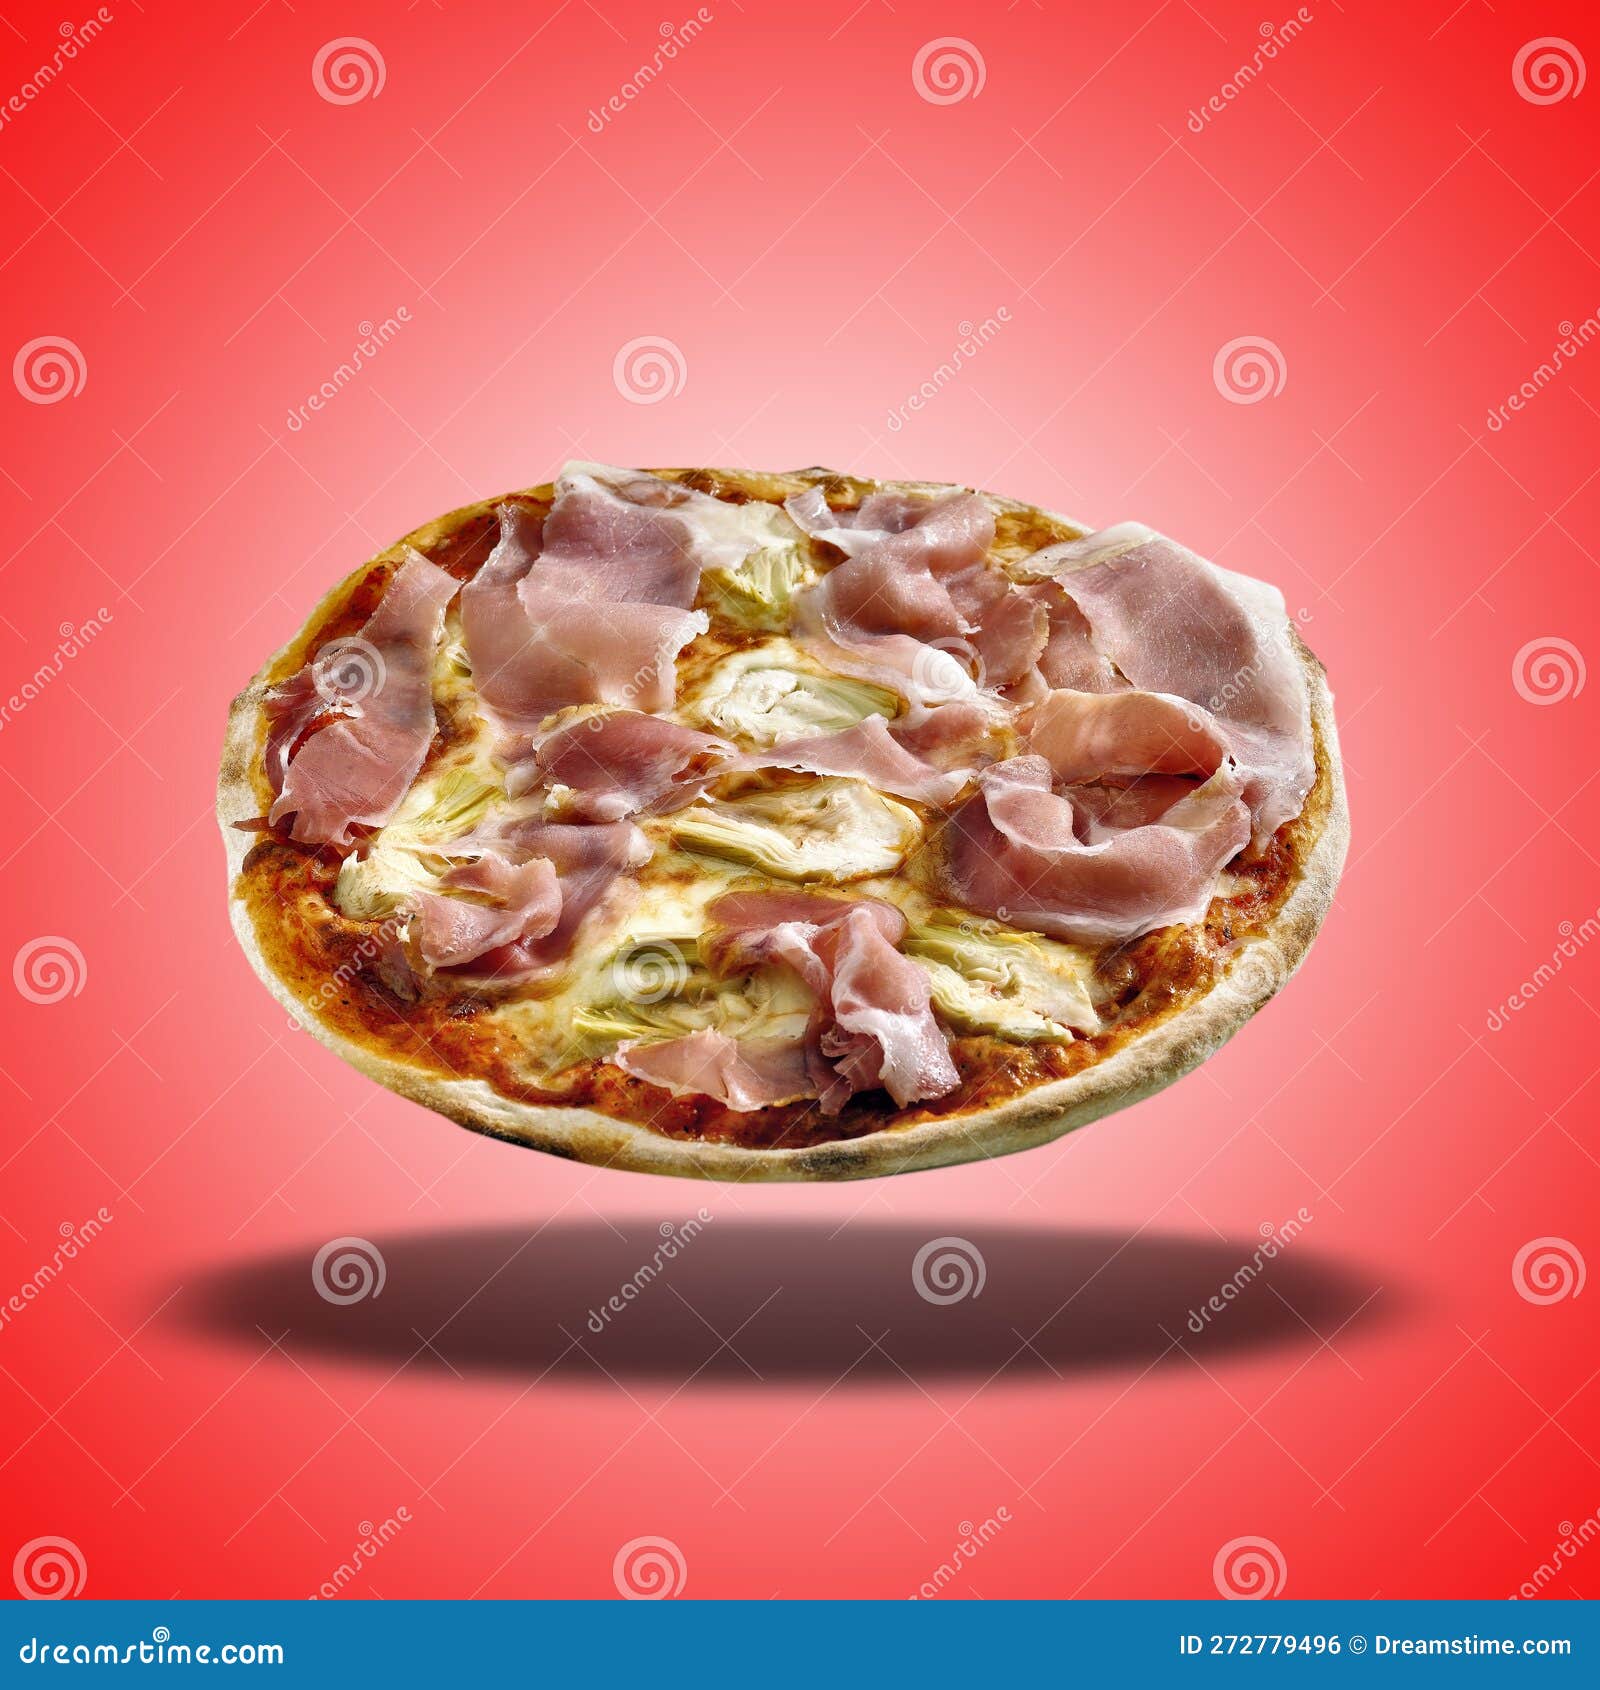 floating pizza fantasia on red radial gradient